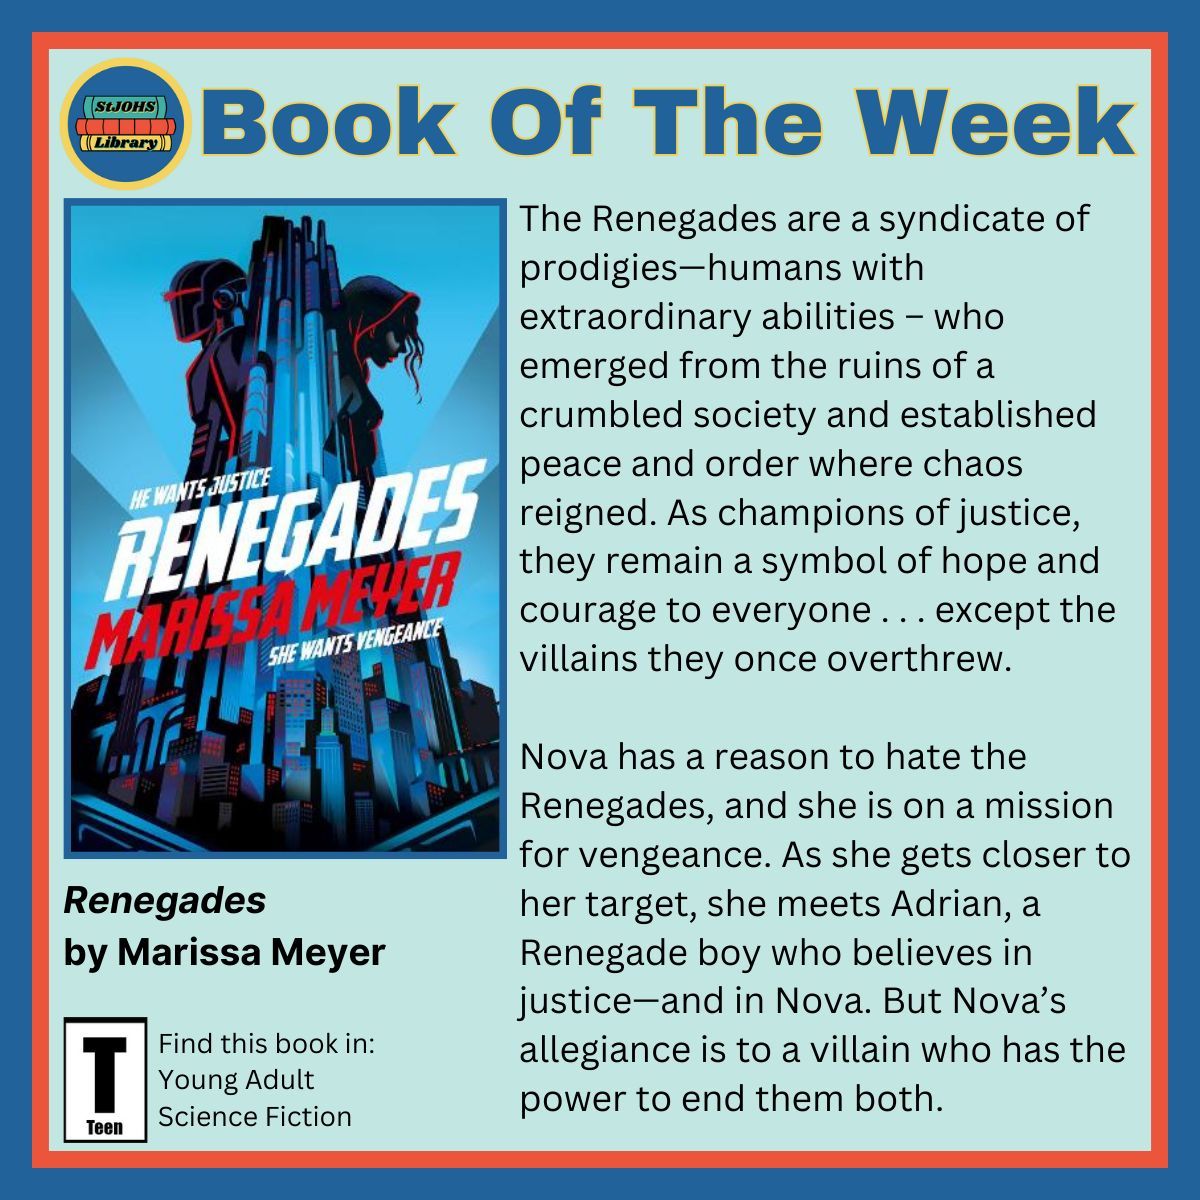 The StJOHS Library #BookOfTheWeek is... 
Renegades by Marissa Meyer